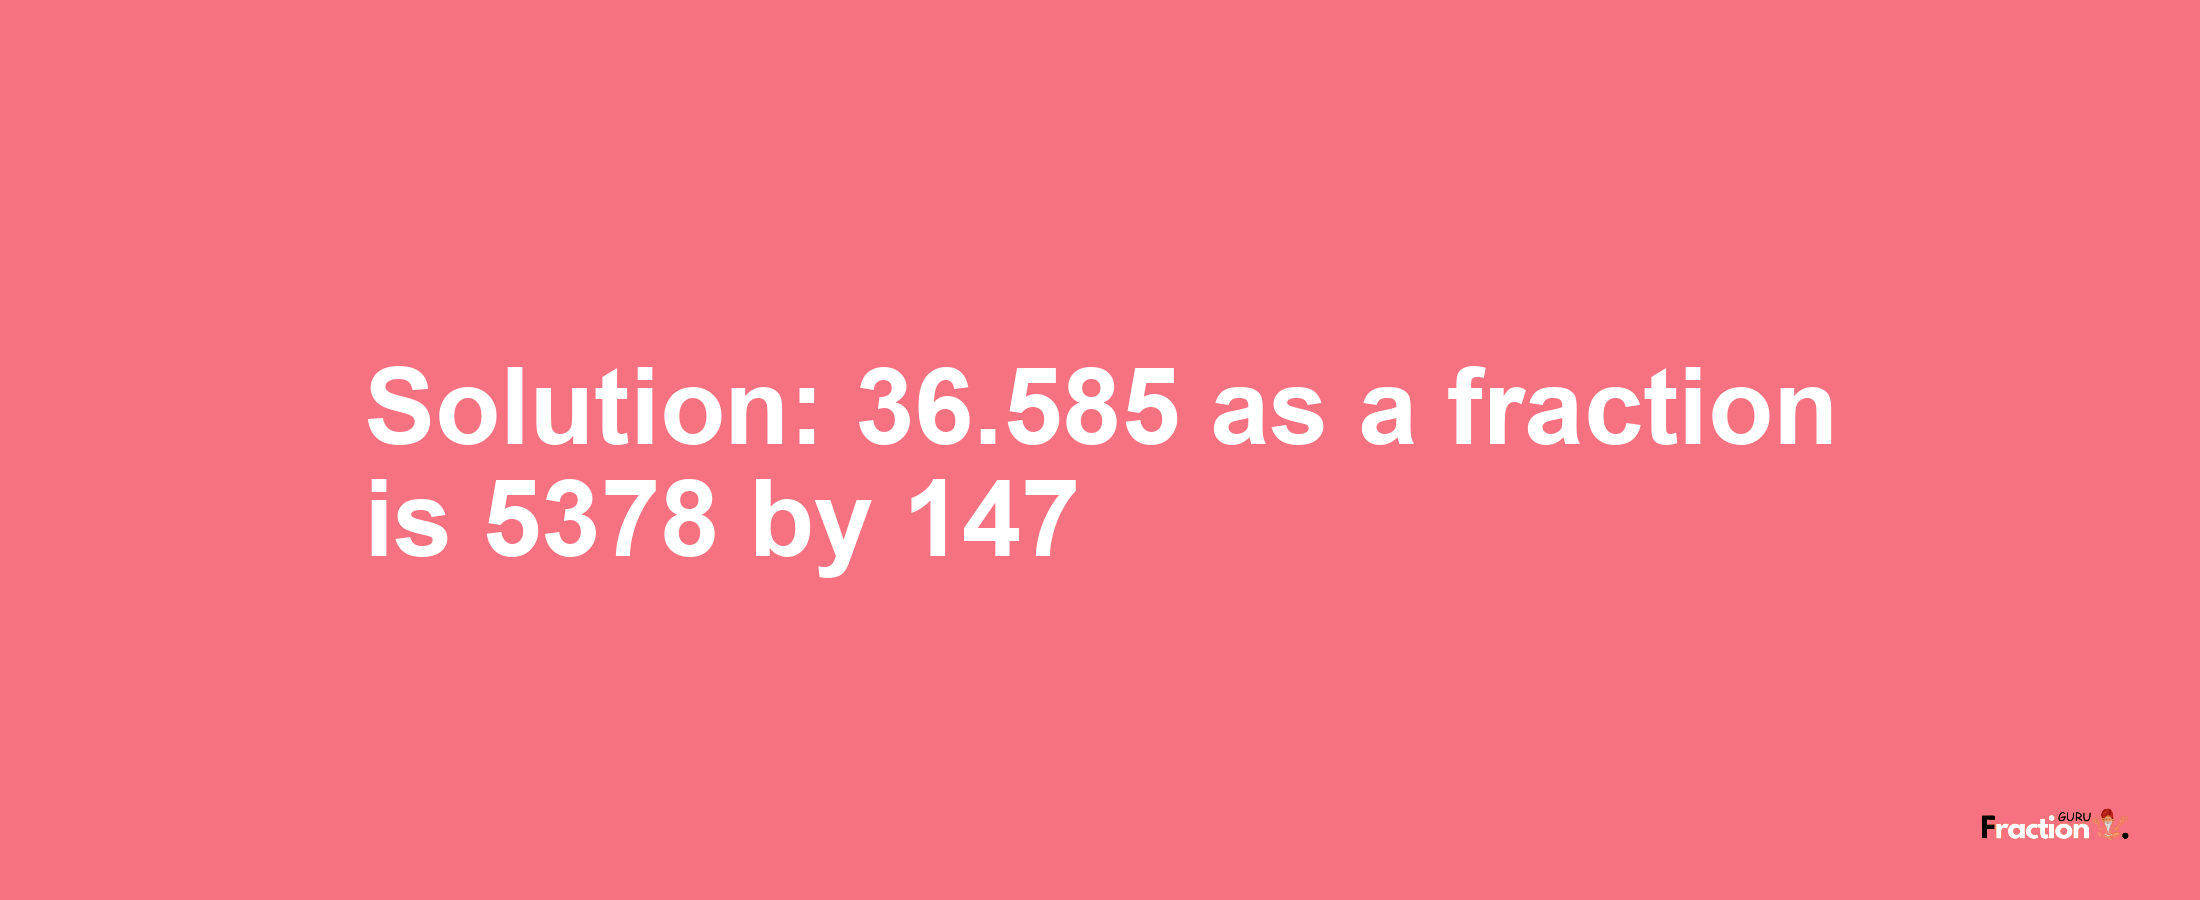 Solution:36.585 as a fraction is 5378/147